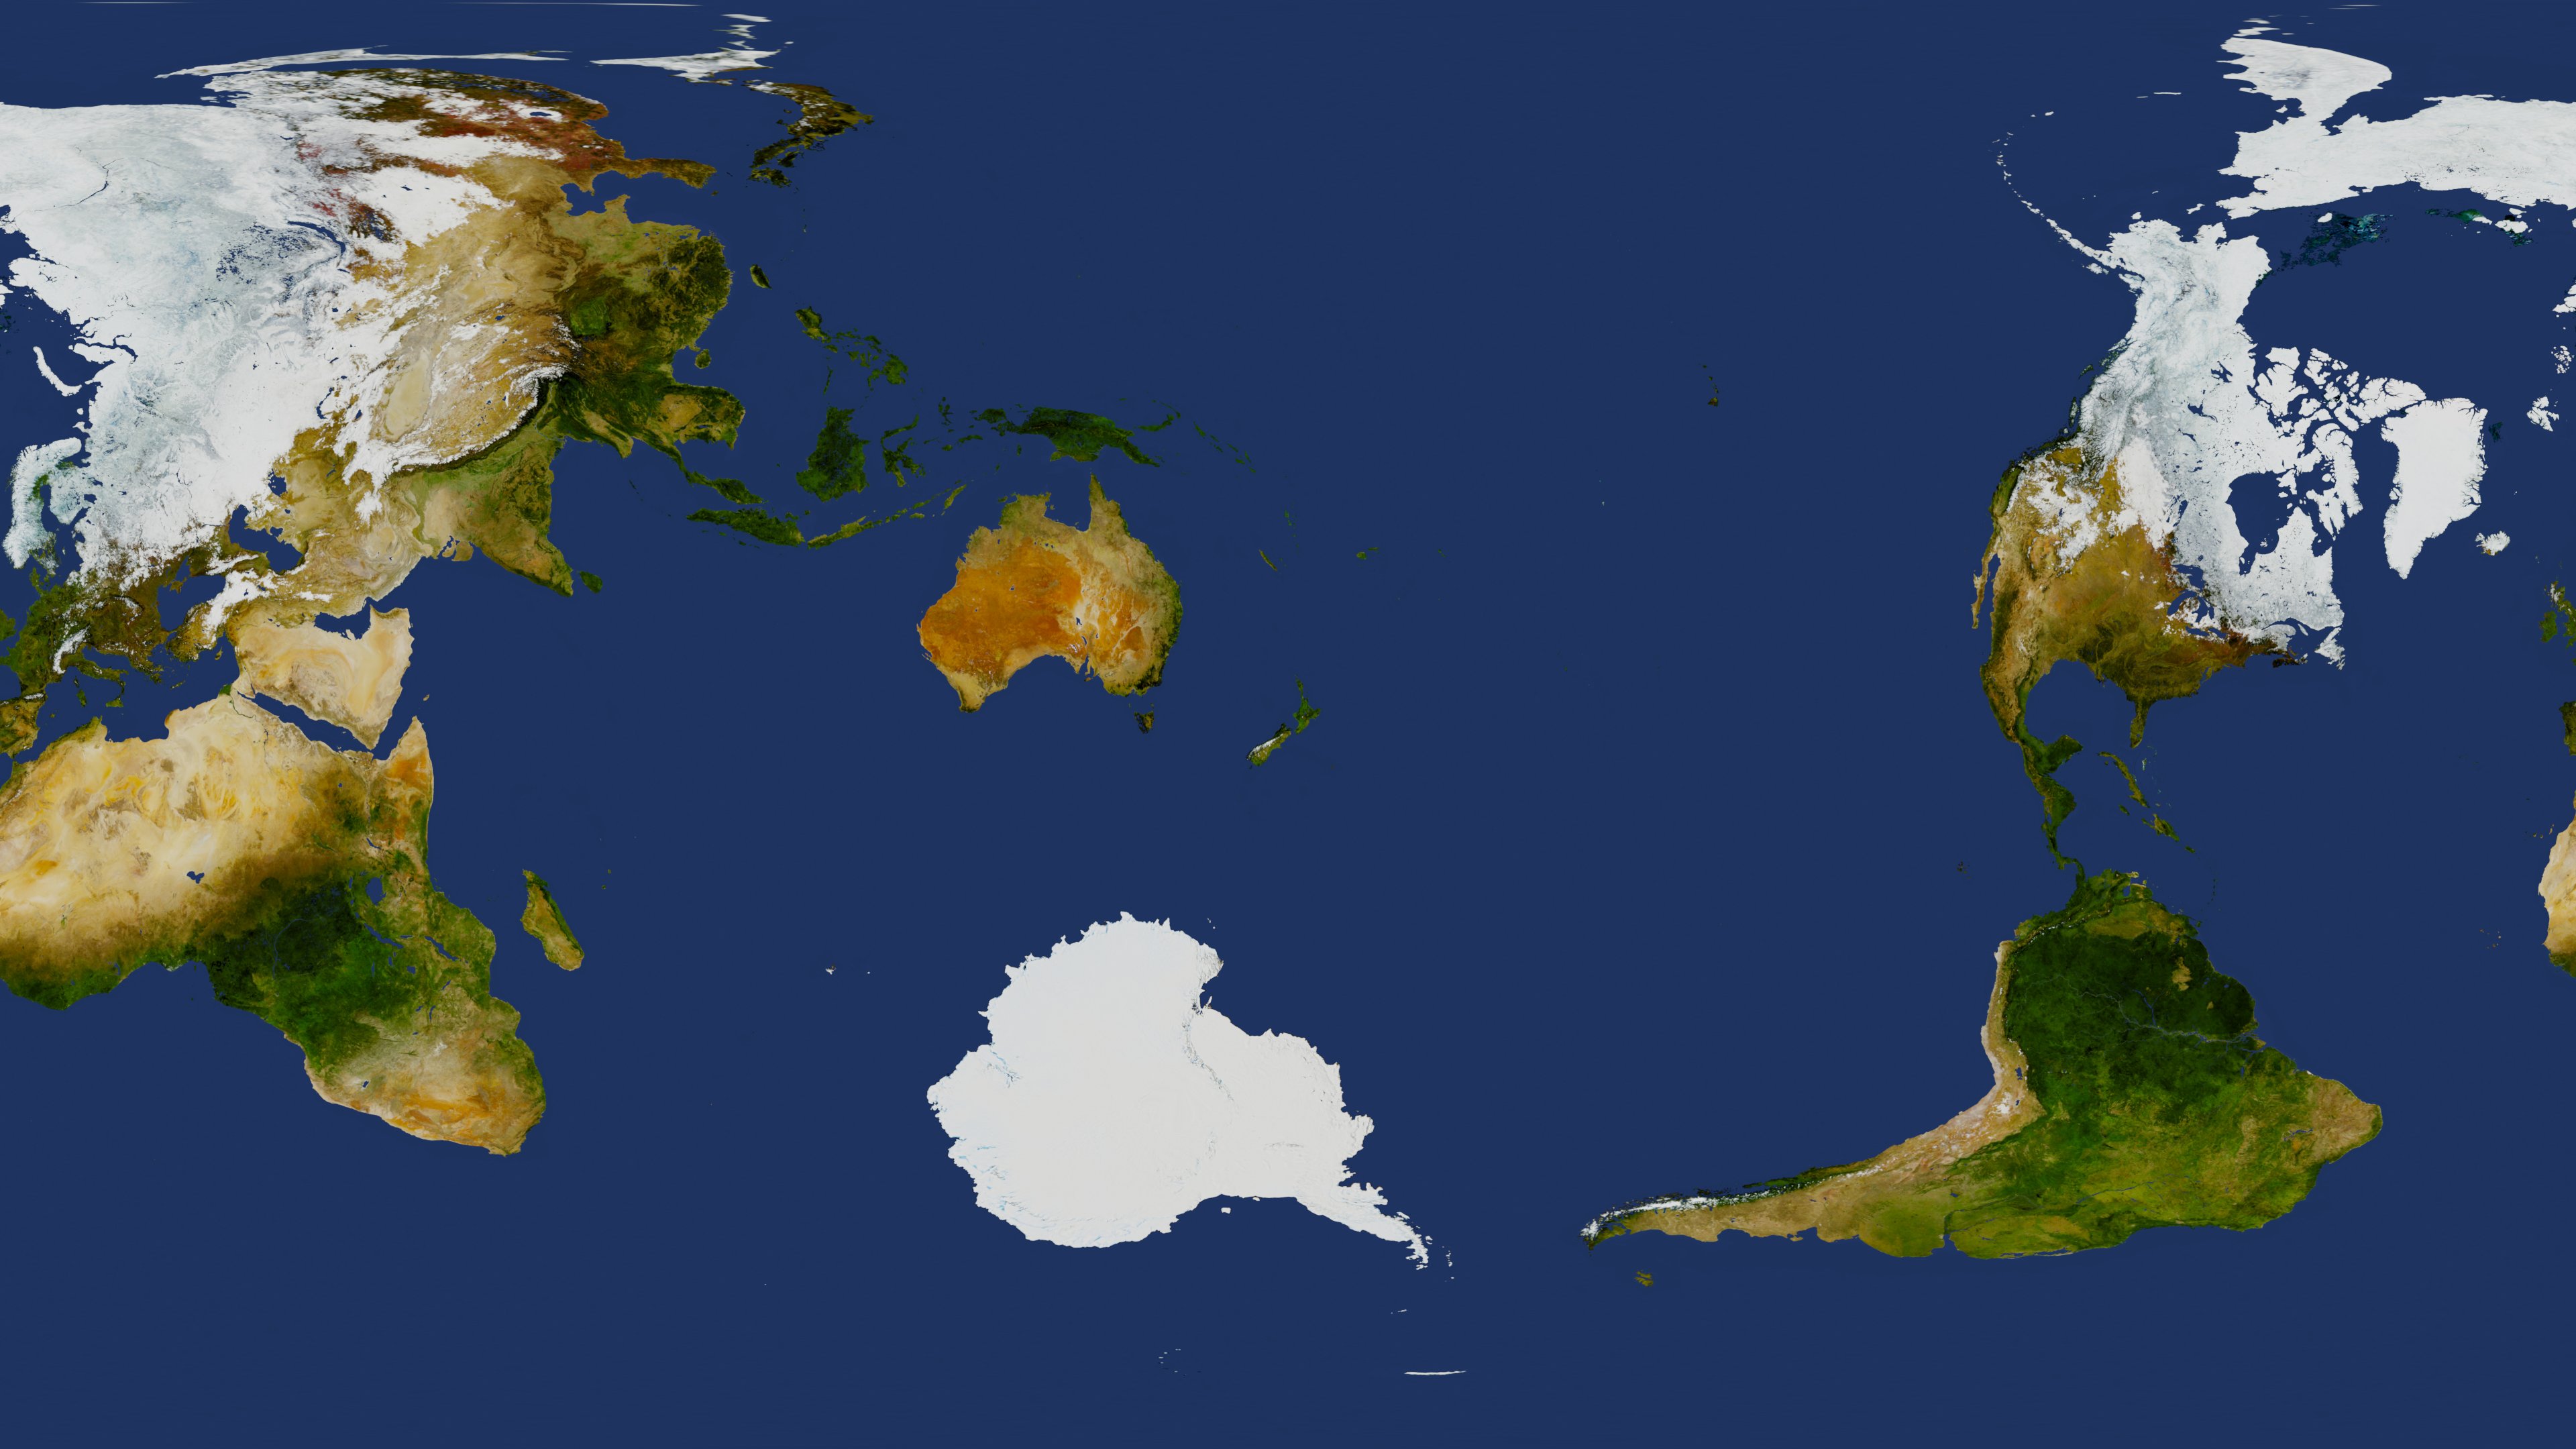 New Zealand as the centre of the world - Epic Maps